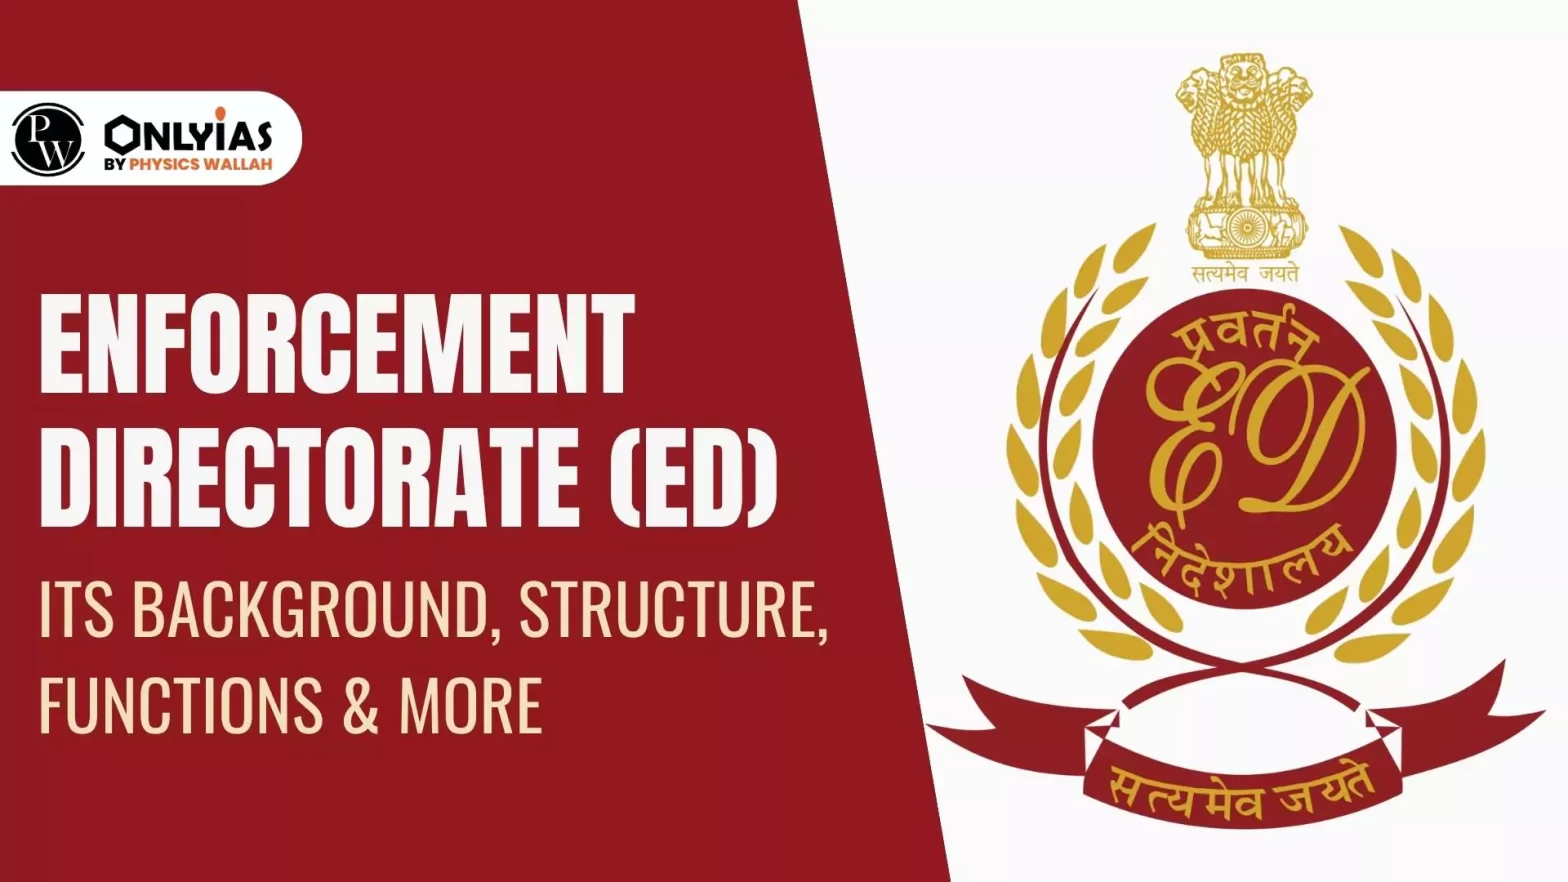 Enforcement Directorate (ED): Its Background, Structure, Functions & More